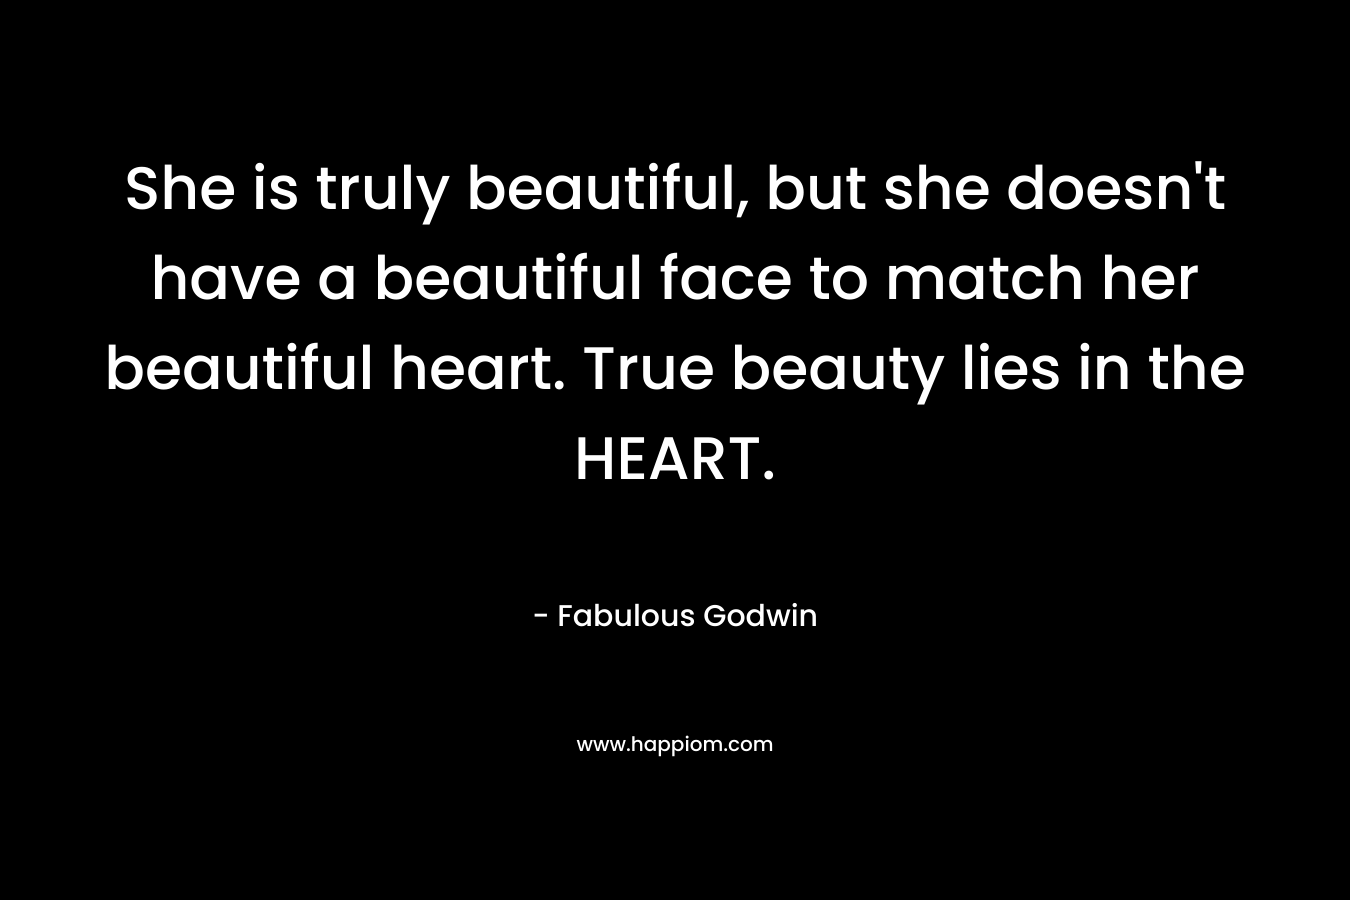 She is truly beautiful, but she doesn't have a beautiful face to match her beautiful heart. True beauty lies in the HEART.